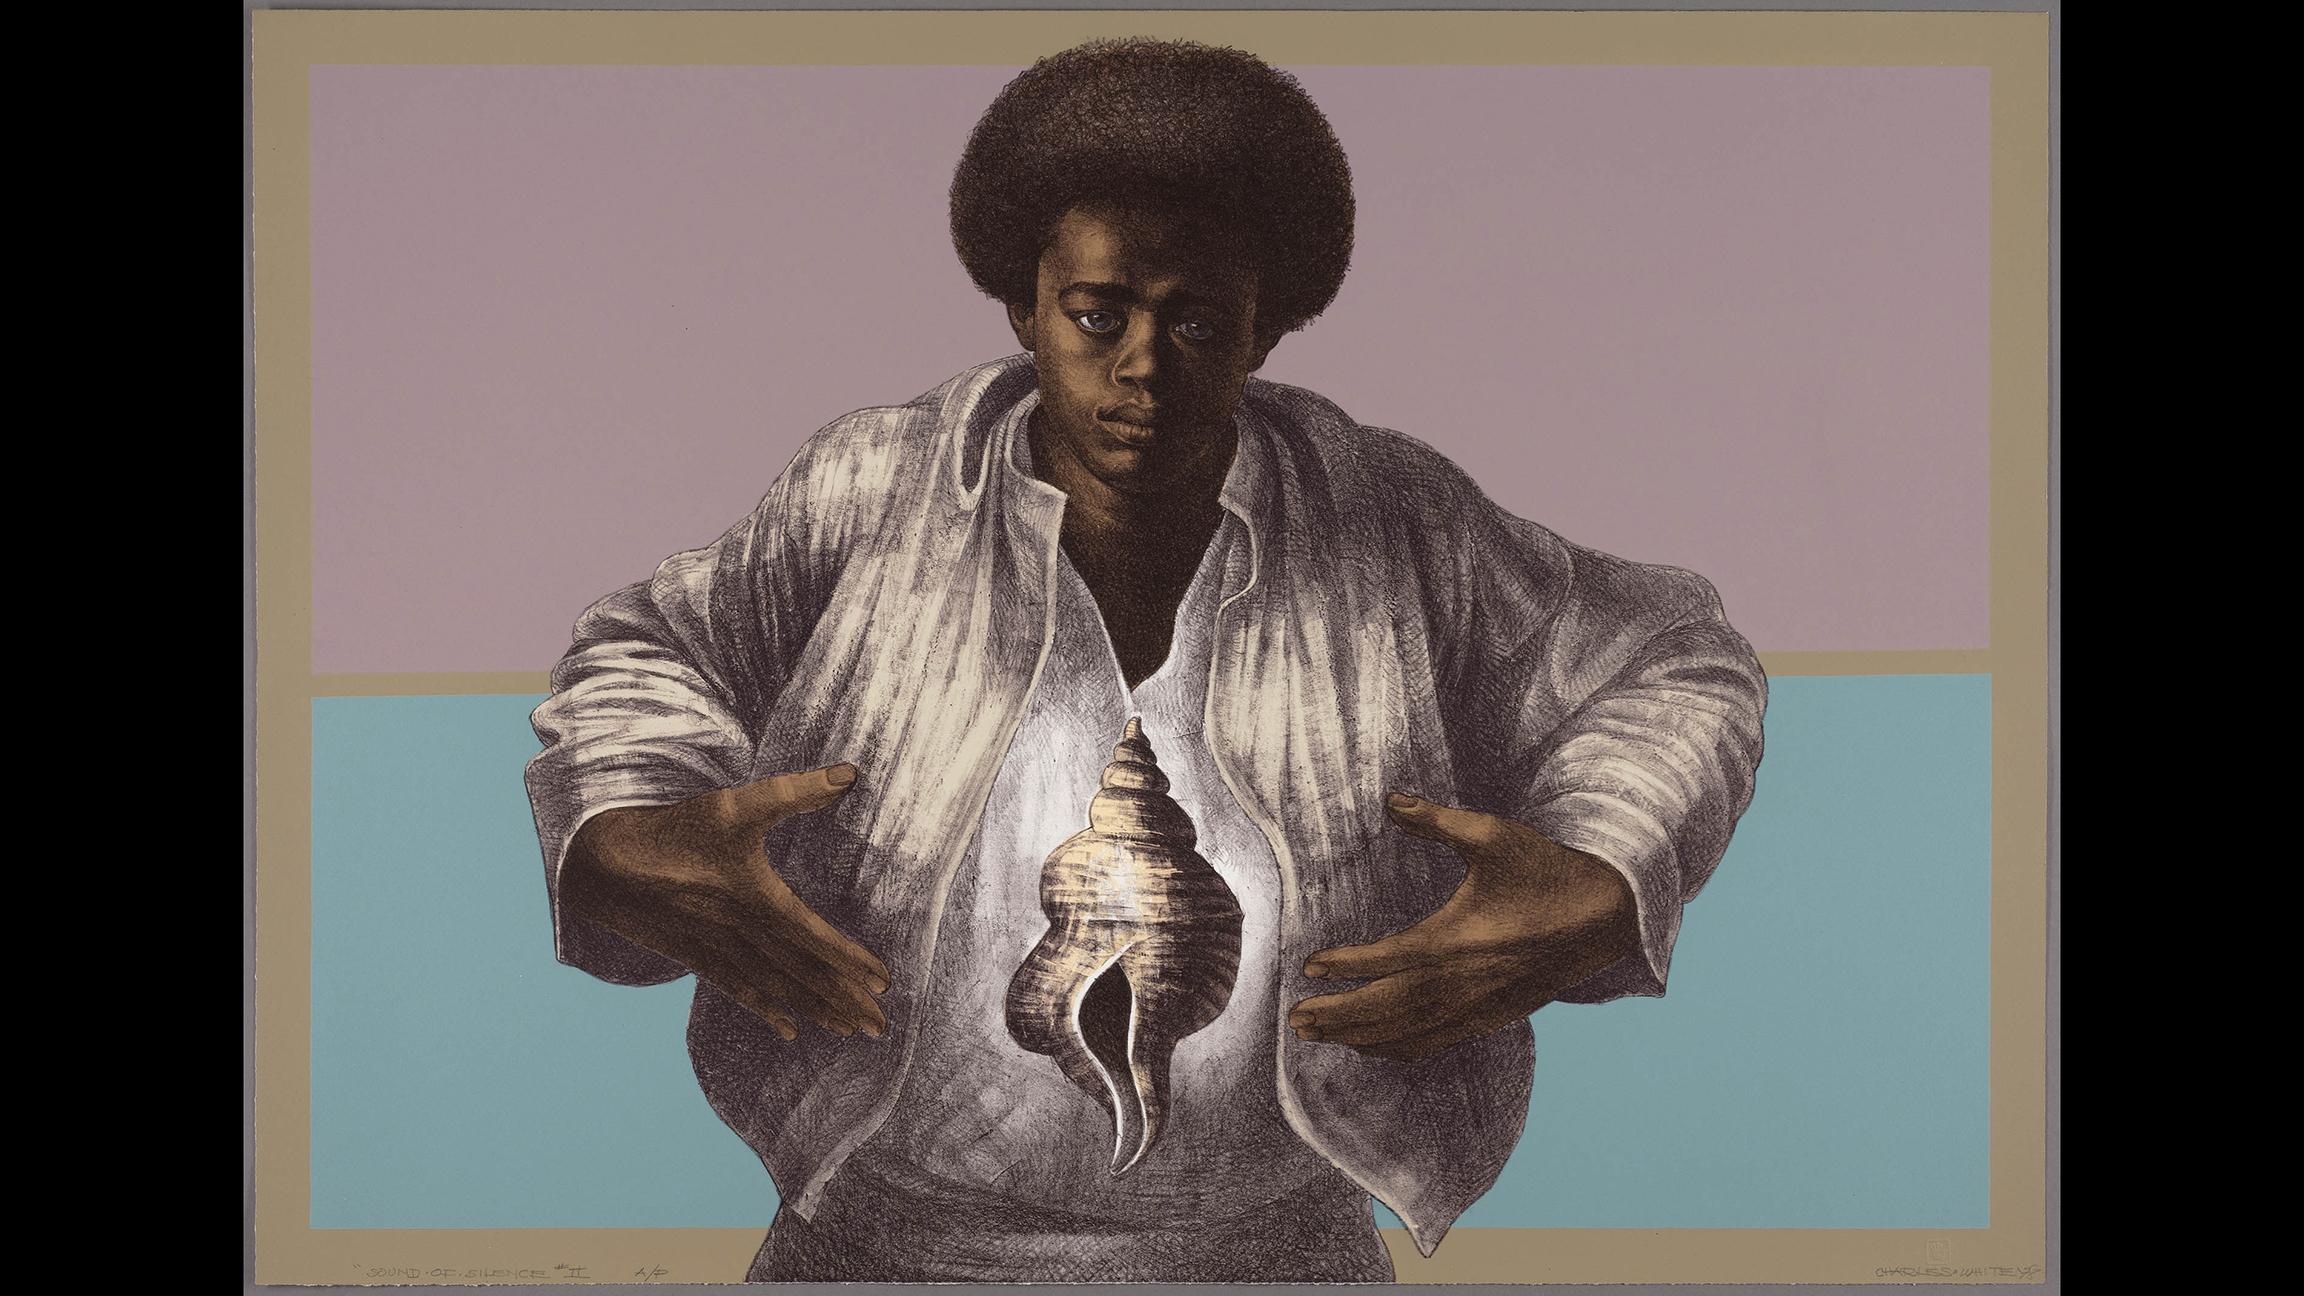 Charles White, printed by David Panosh, published by Hand Graphics, Ltd. “Sound of Silence,” 1978. The Art Institute of Chicago, Margaret Fisher Fund. (© The Charles White Archives Inc.)